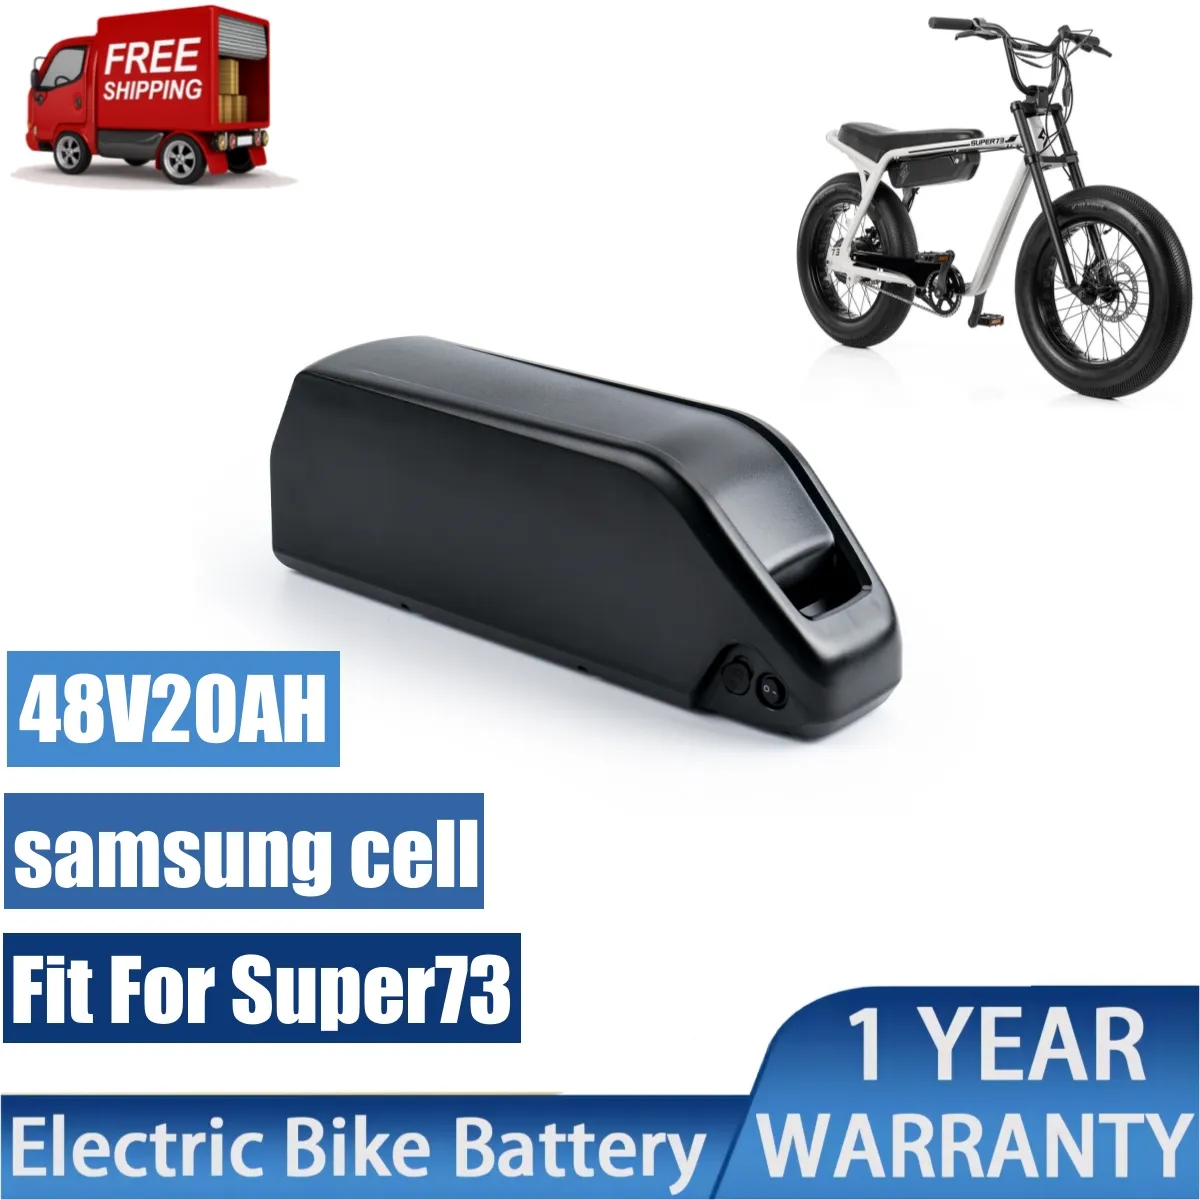 Samsung Ebike Batteries Electric Bike Battery 48V 20Ah With Powerful 21700 Cell 50E For 500W 1000W Motor Pack 25Ah 36V